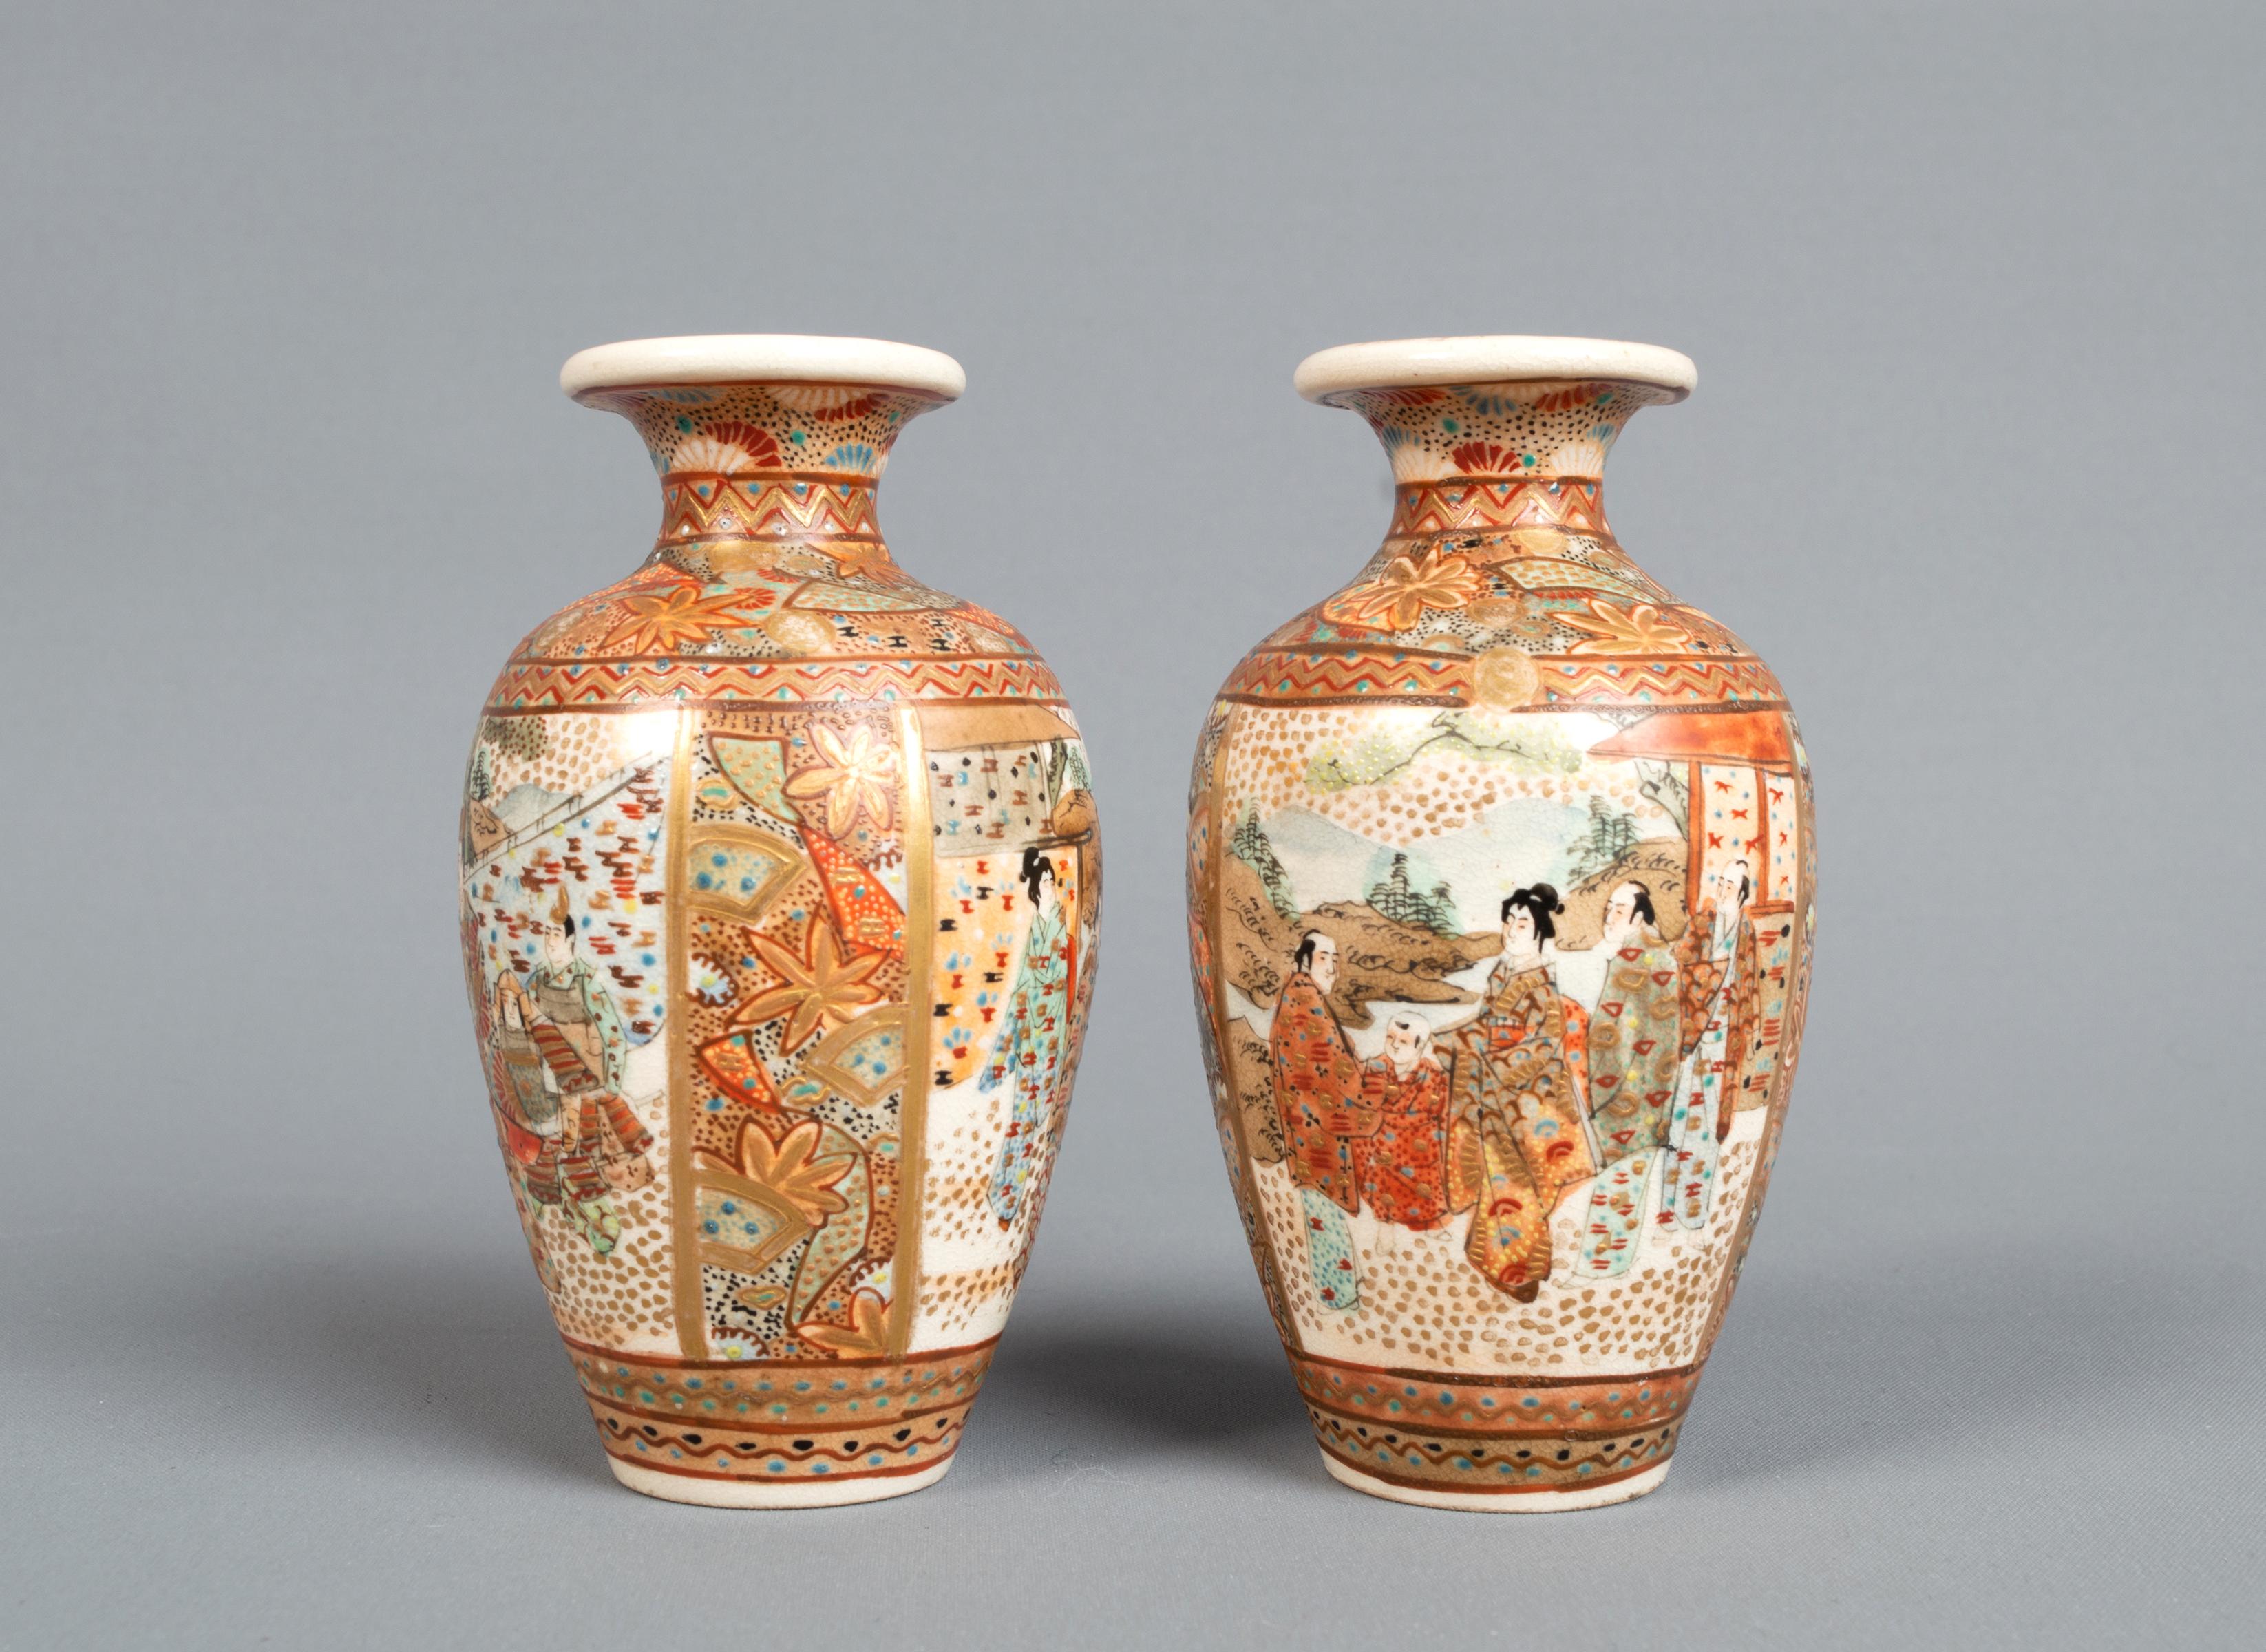 A pair of 19th century Japanese miniature Kutani vases.
Meiji period C.1880. 

Fine quality, hand painted with decorative and a figural panel in coral and gilt. With signed makers character marks to the base. 

In excellent condition